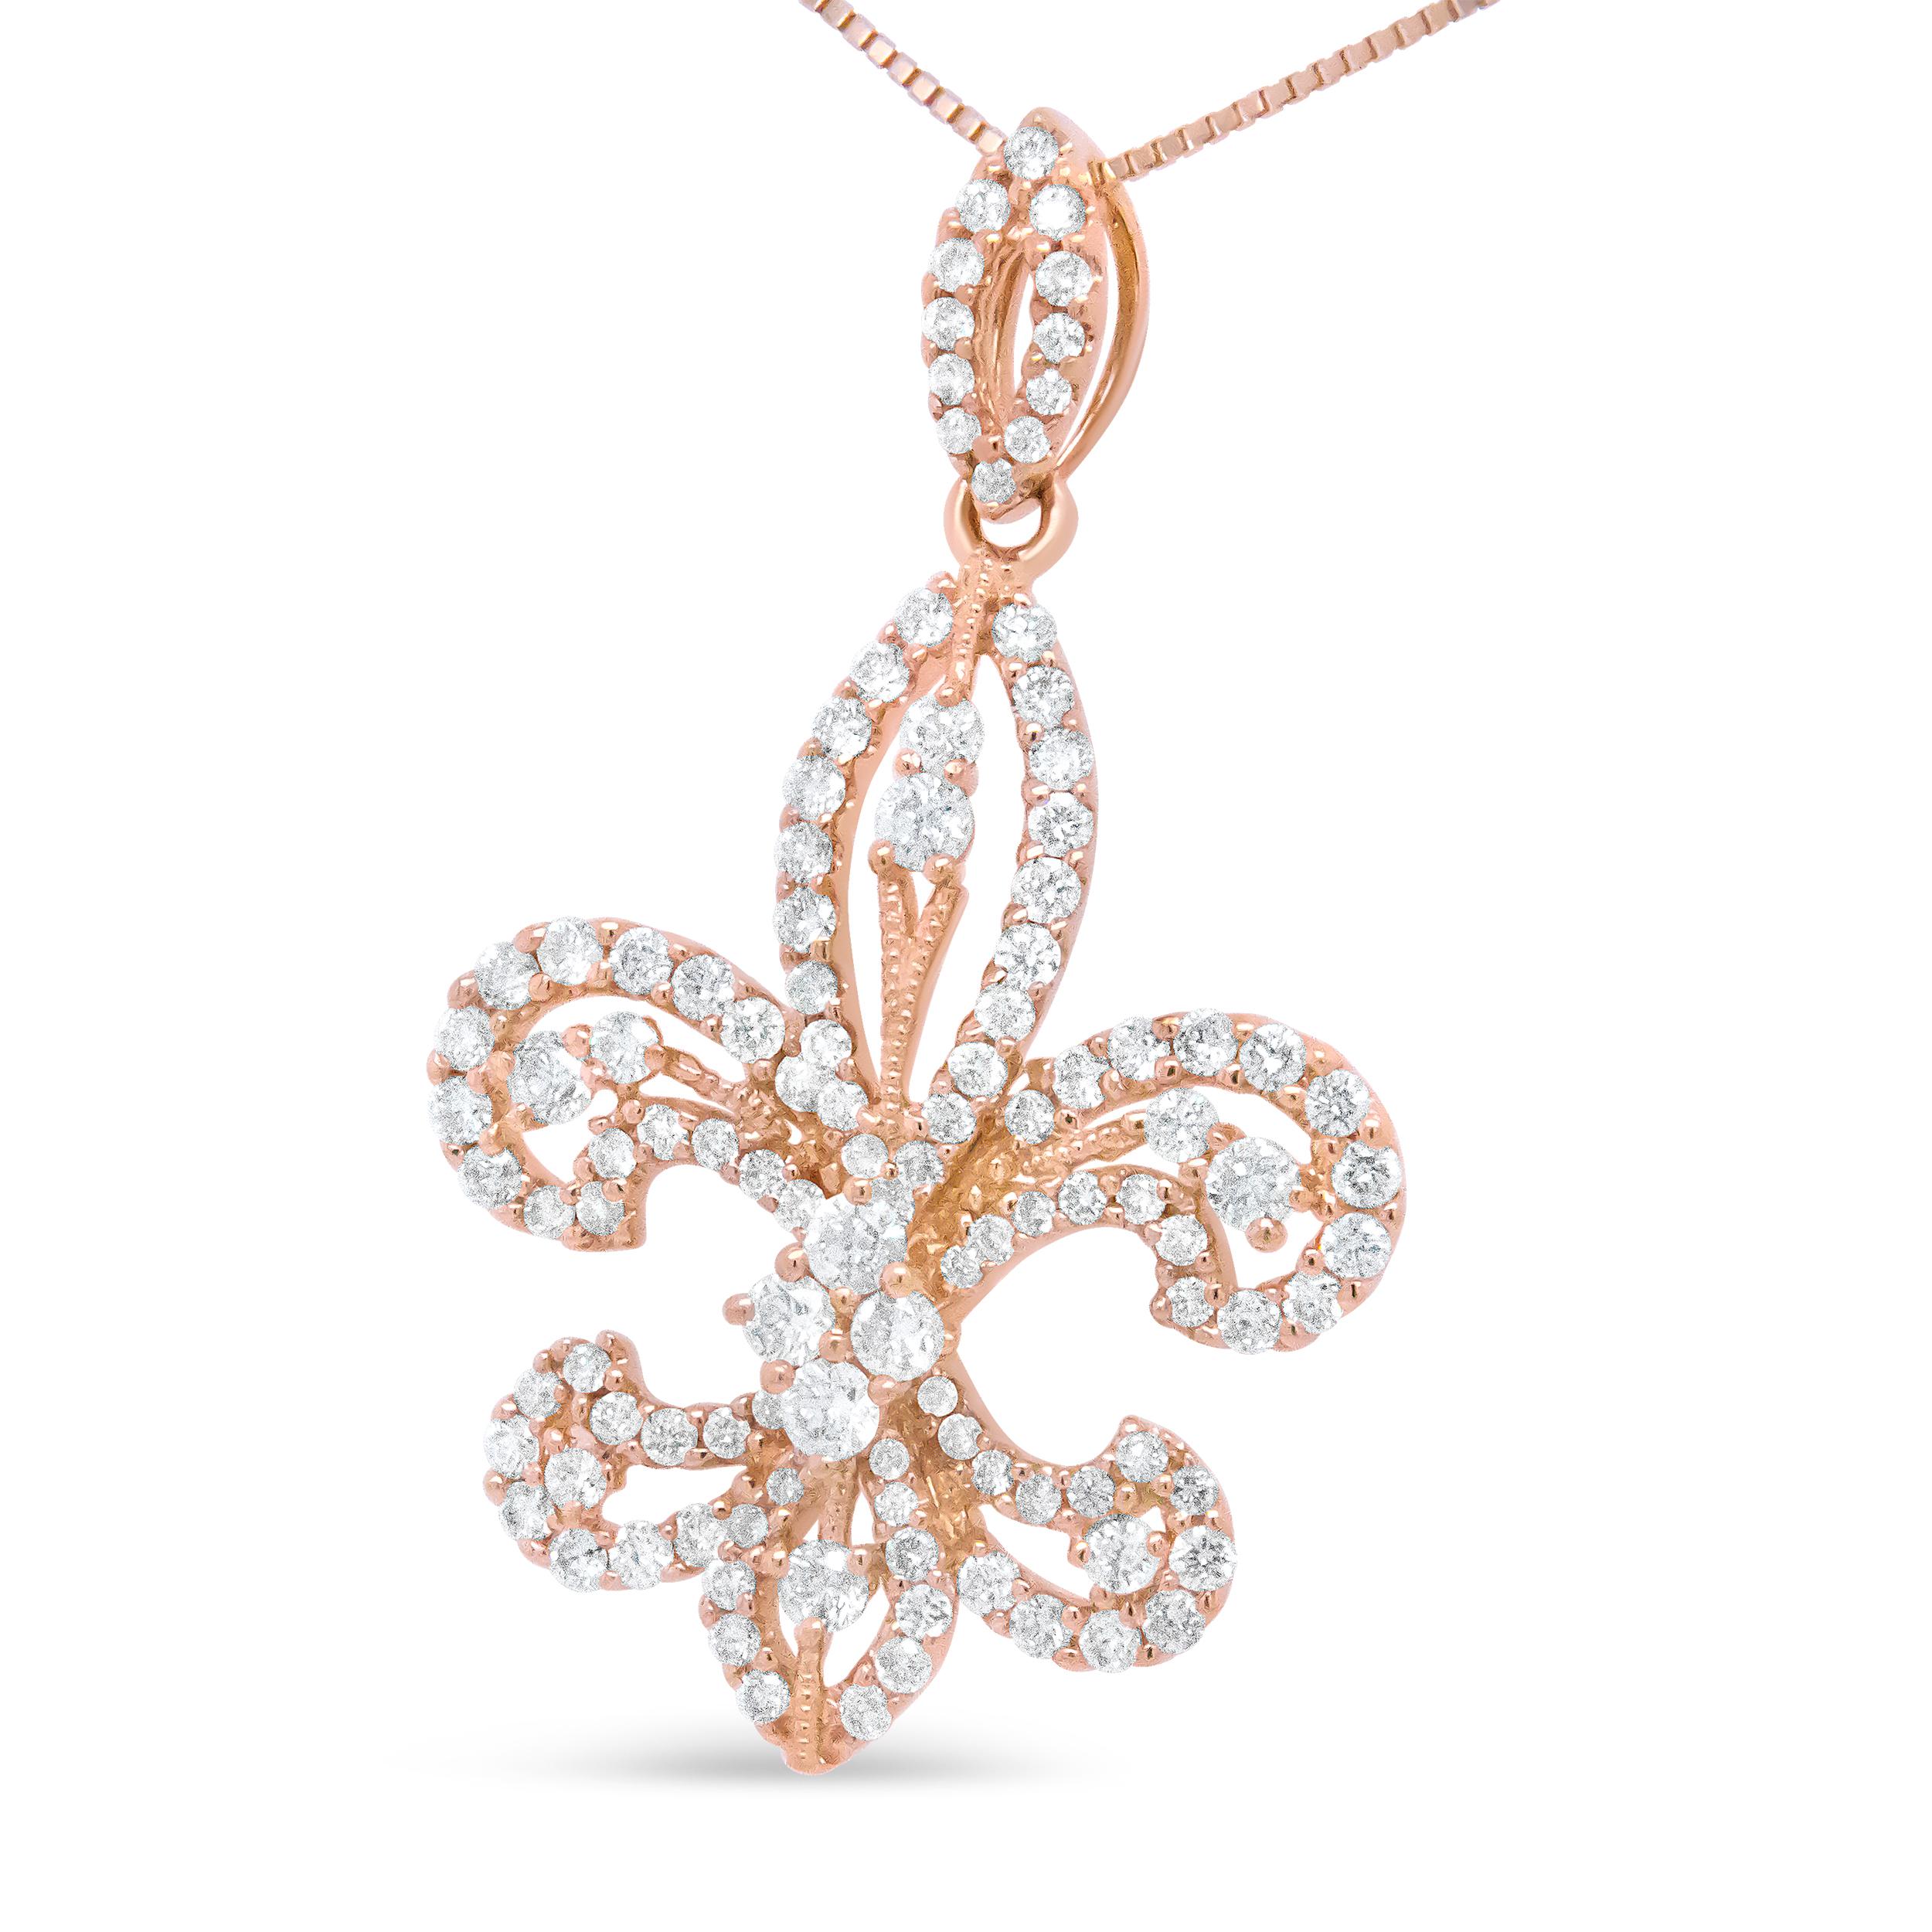 Regal and timeless, this 14k yellow gold pendant necklace is elegant in an openwork fleur de lis silhouette and enhanced by a total 1.00 cttw round diamonds in prong setting with an approximate H-I color and SI2-I1 clarity. This symbol has long